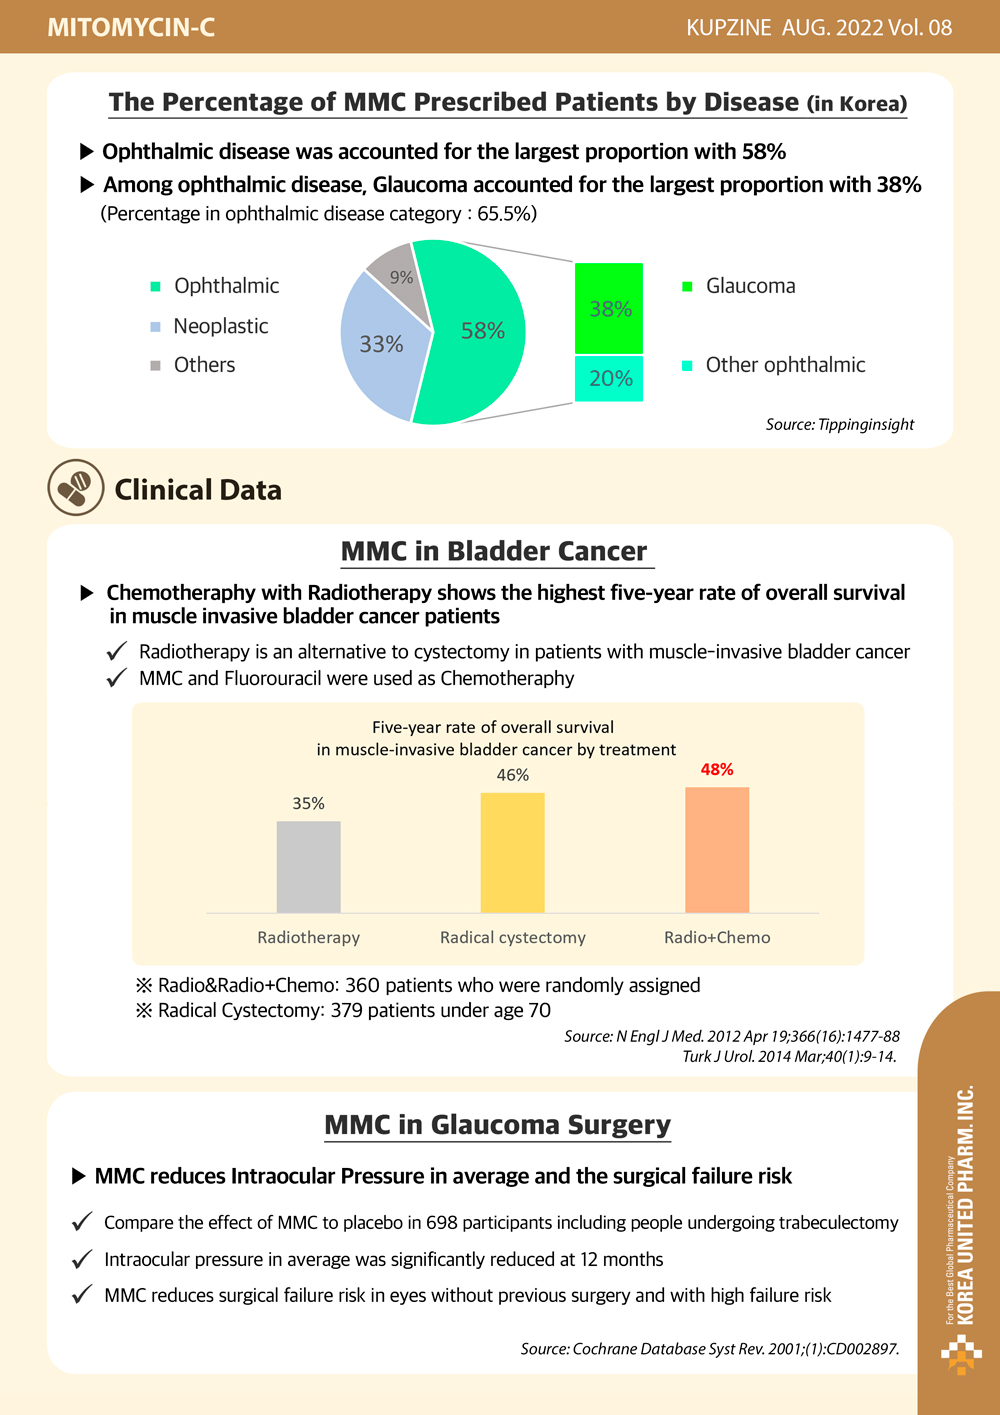 Clinical data for Mitomycin-C in bladder cancer and glaucoma surgery.